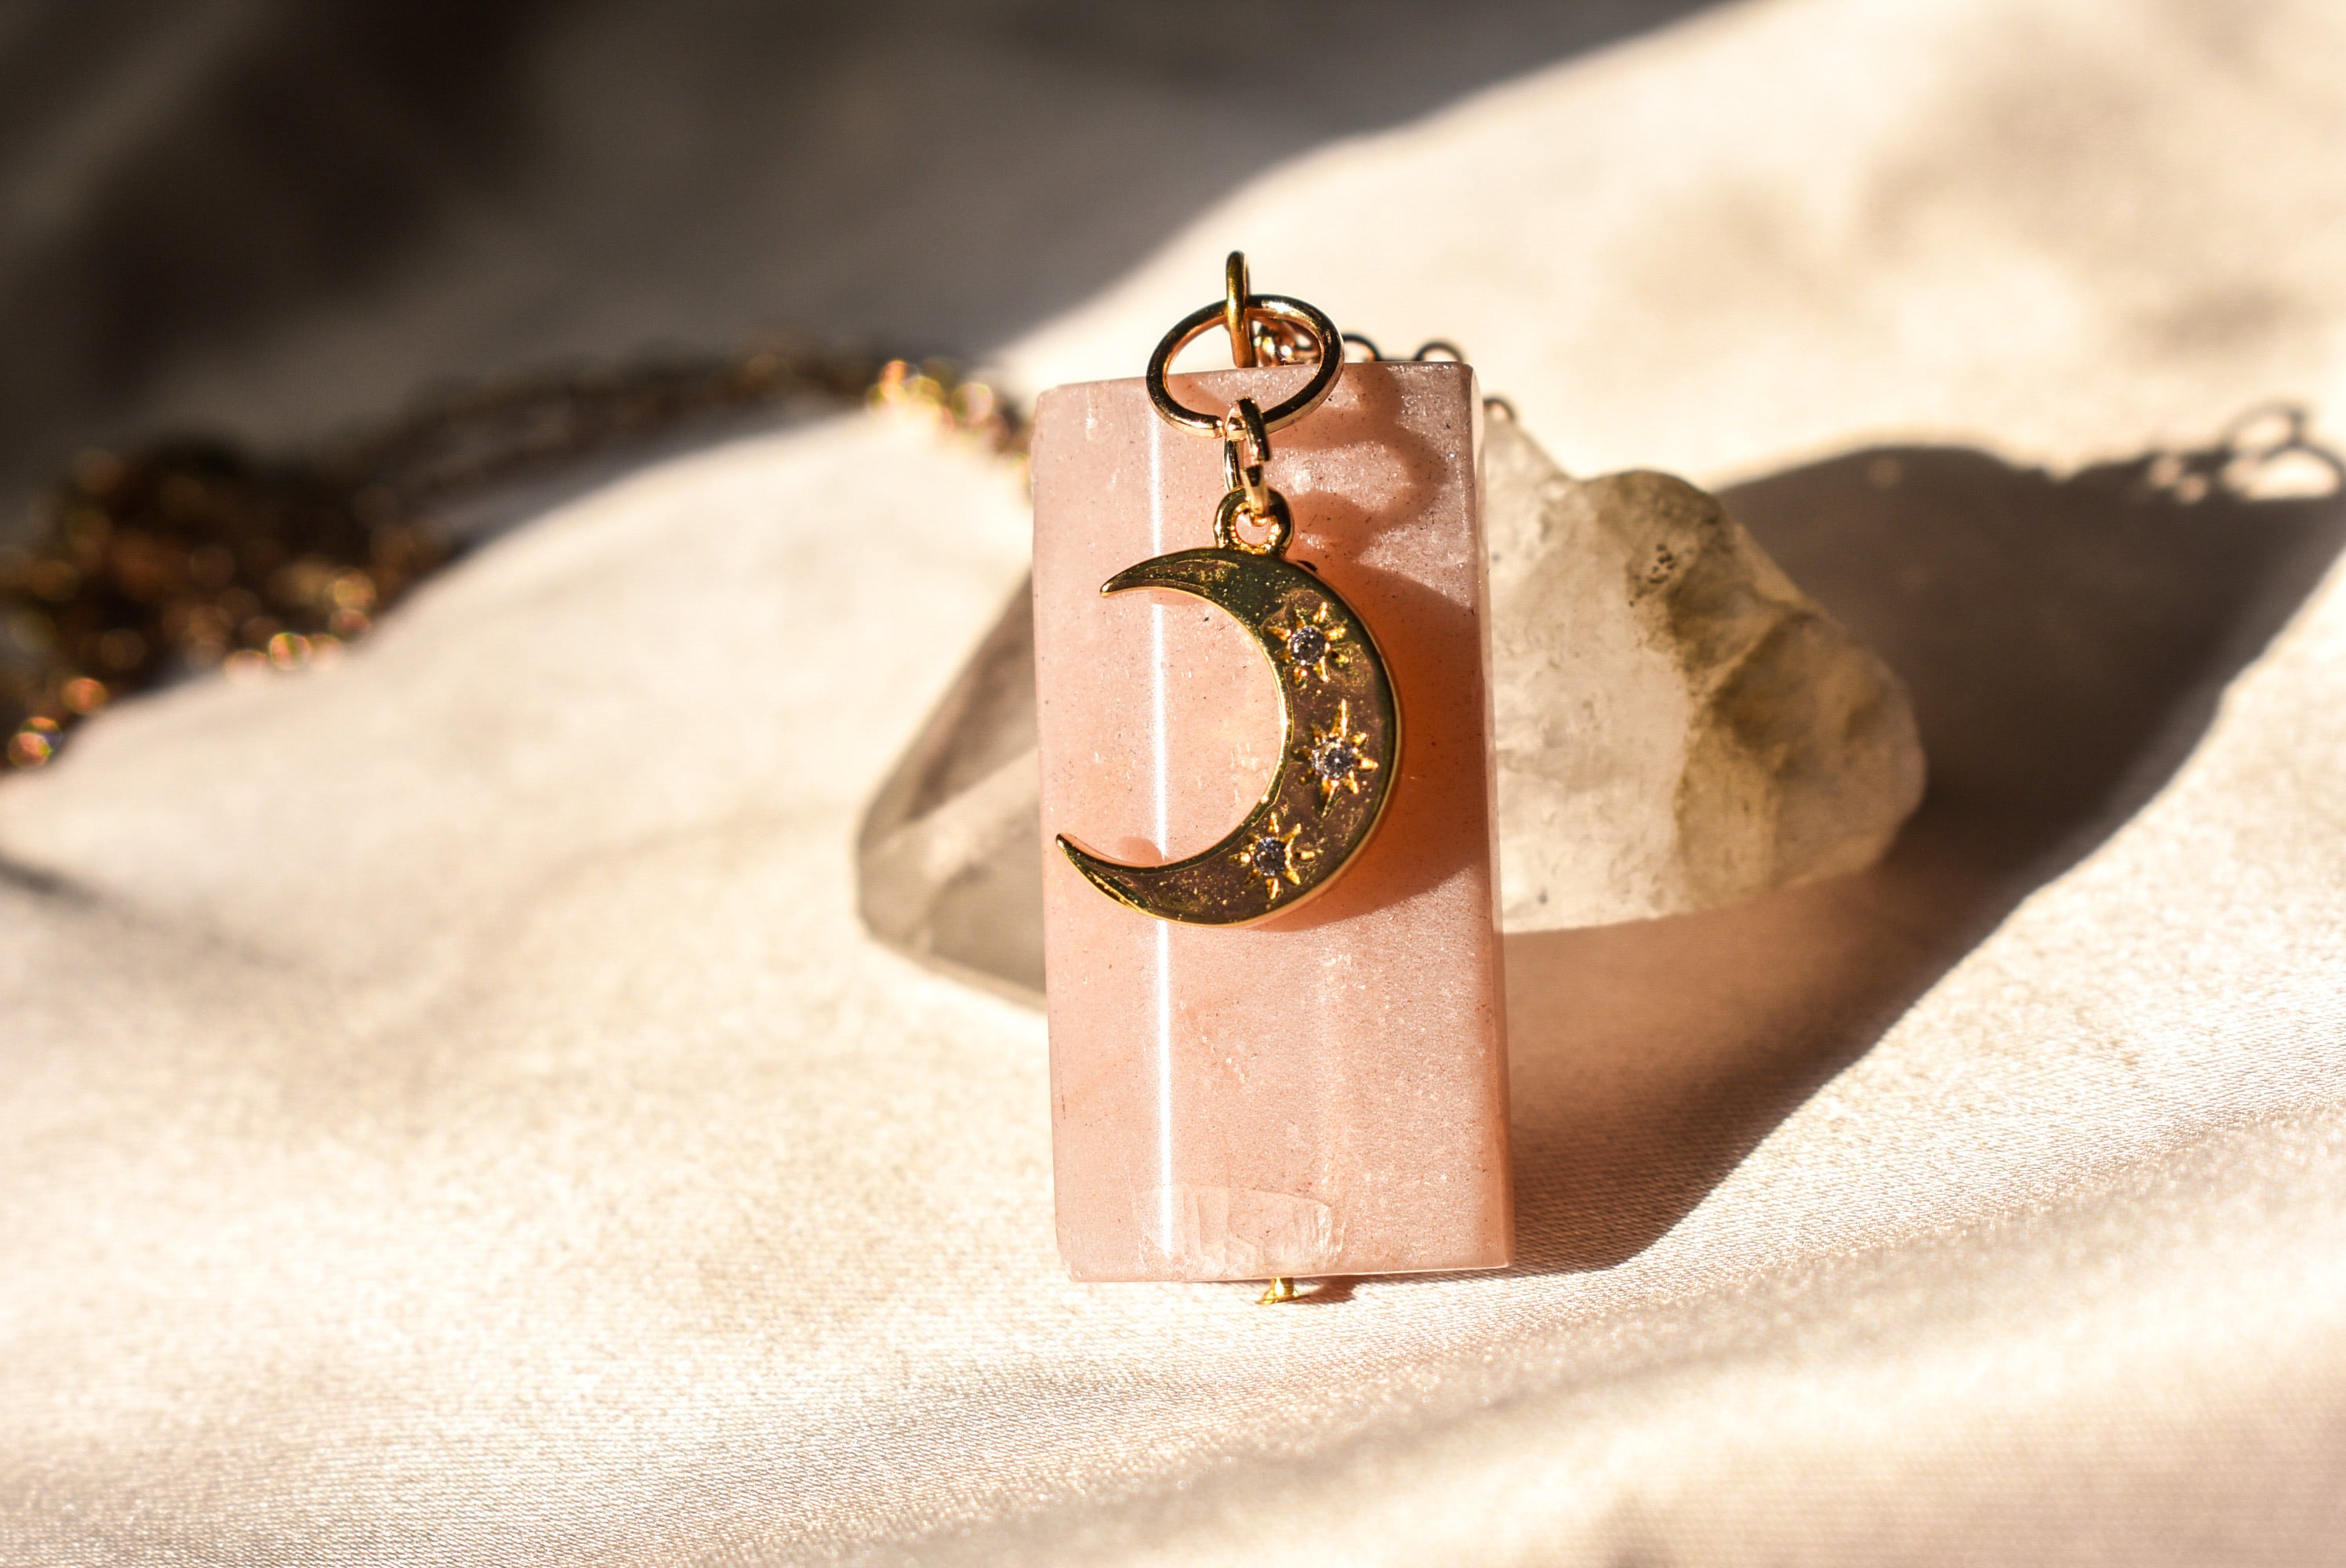 Peach Moonstone Necklace Gold Filled